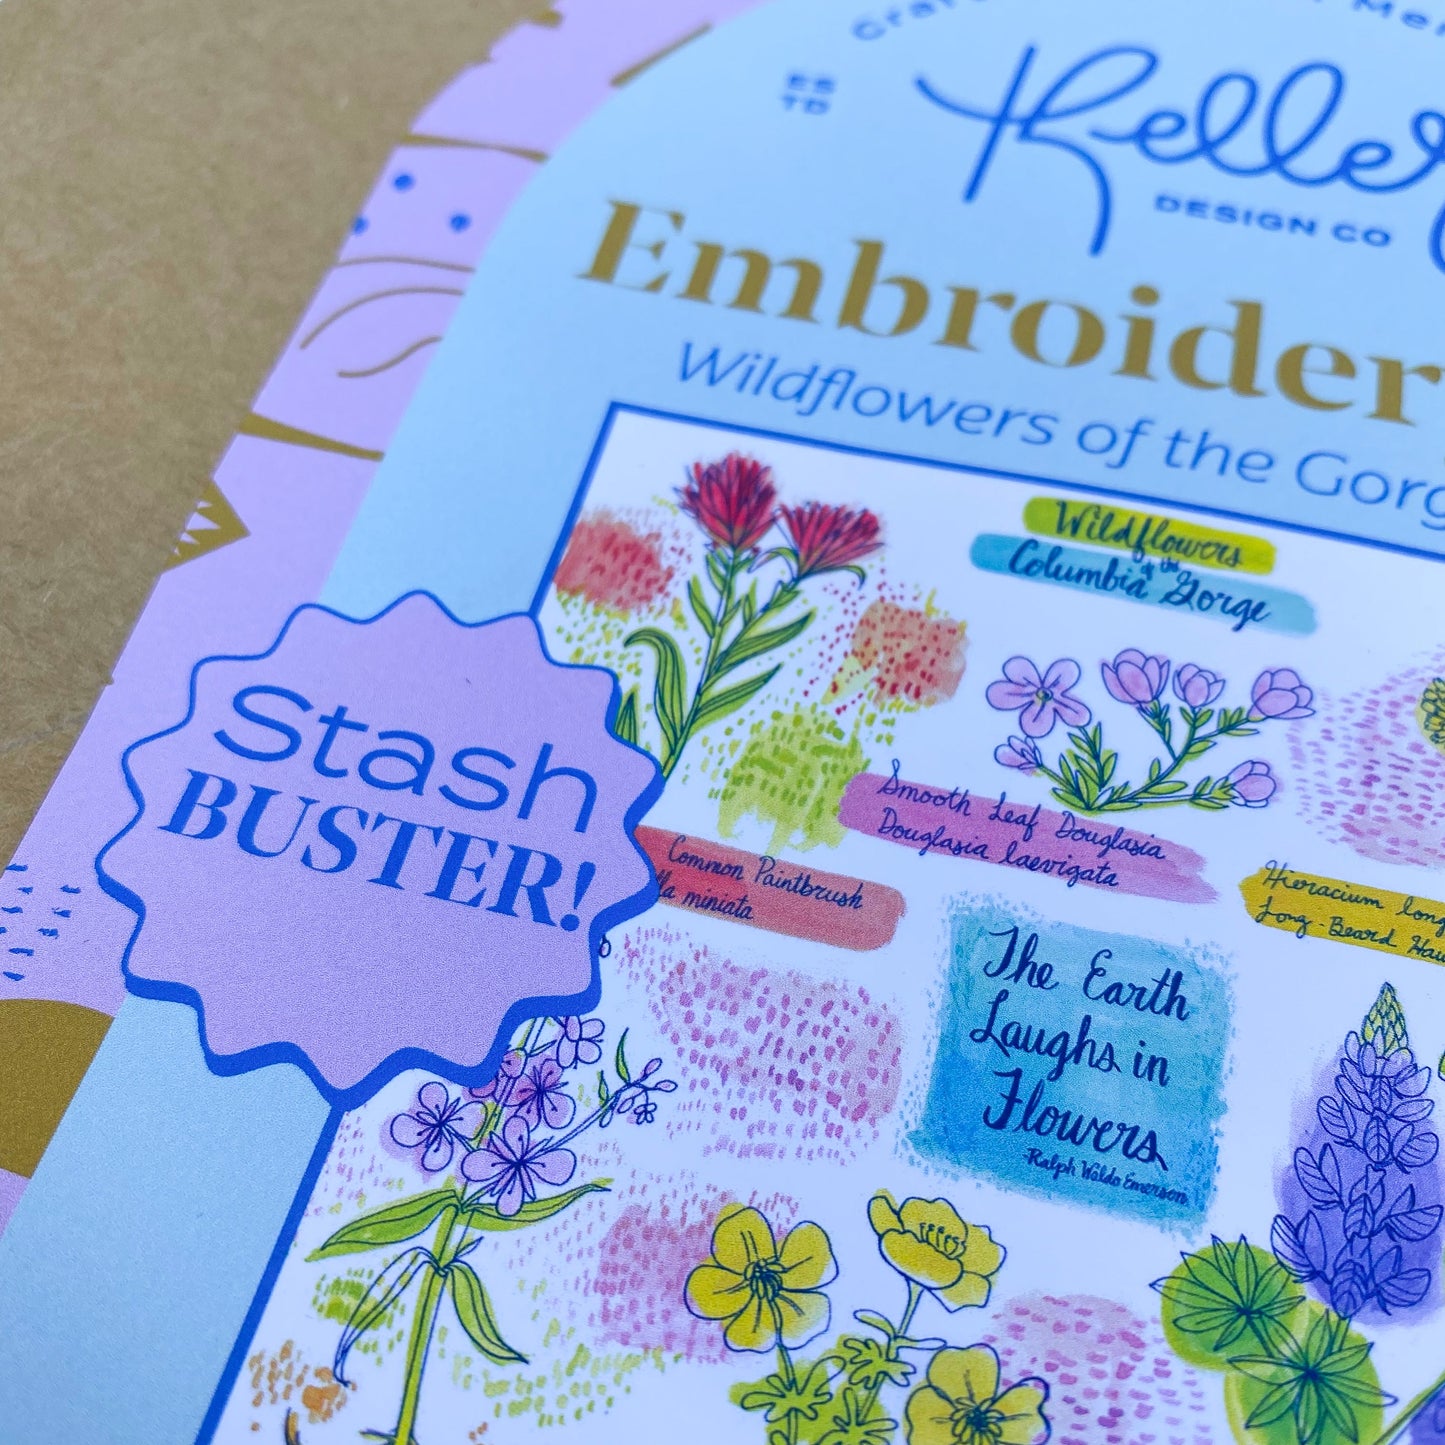 Stash Buster! Wildflowers Embroidery Kit-Wholesale